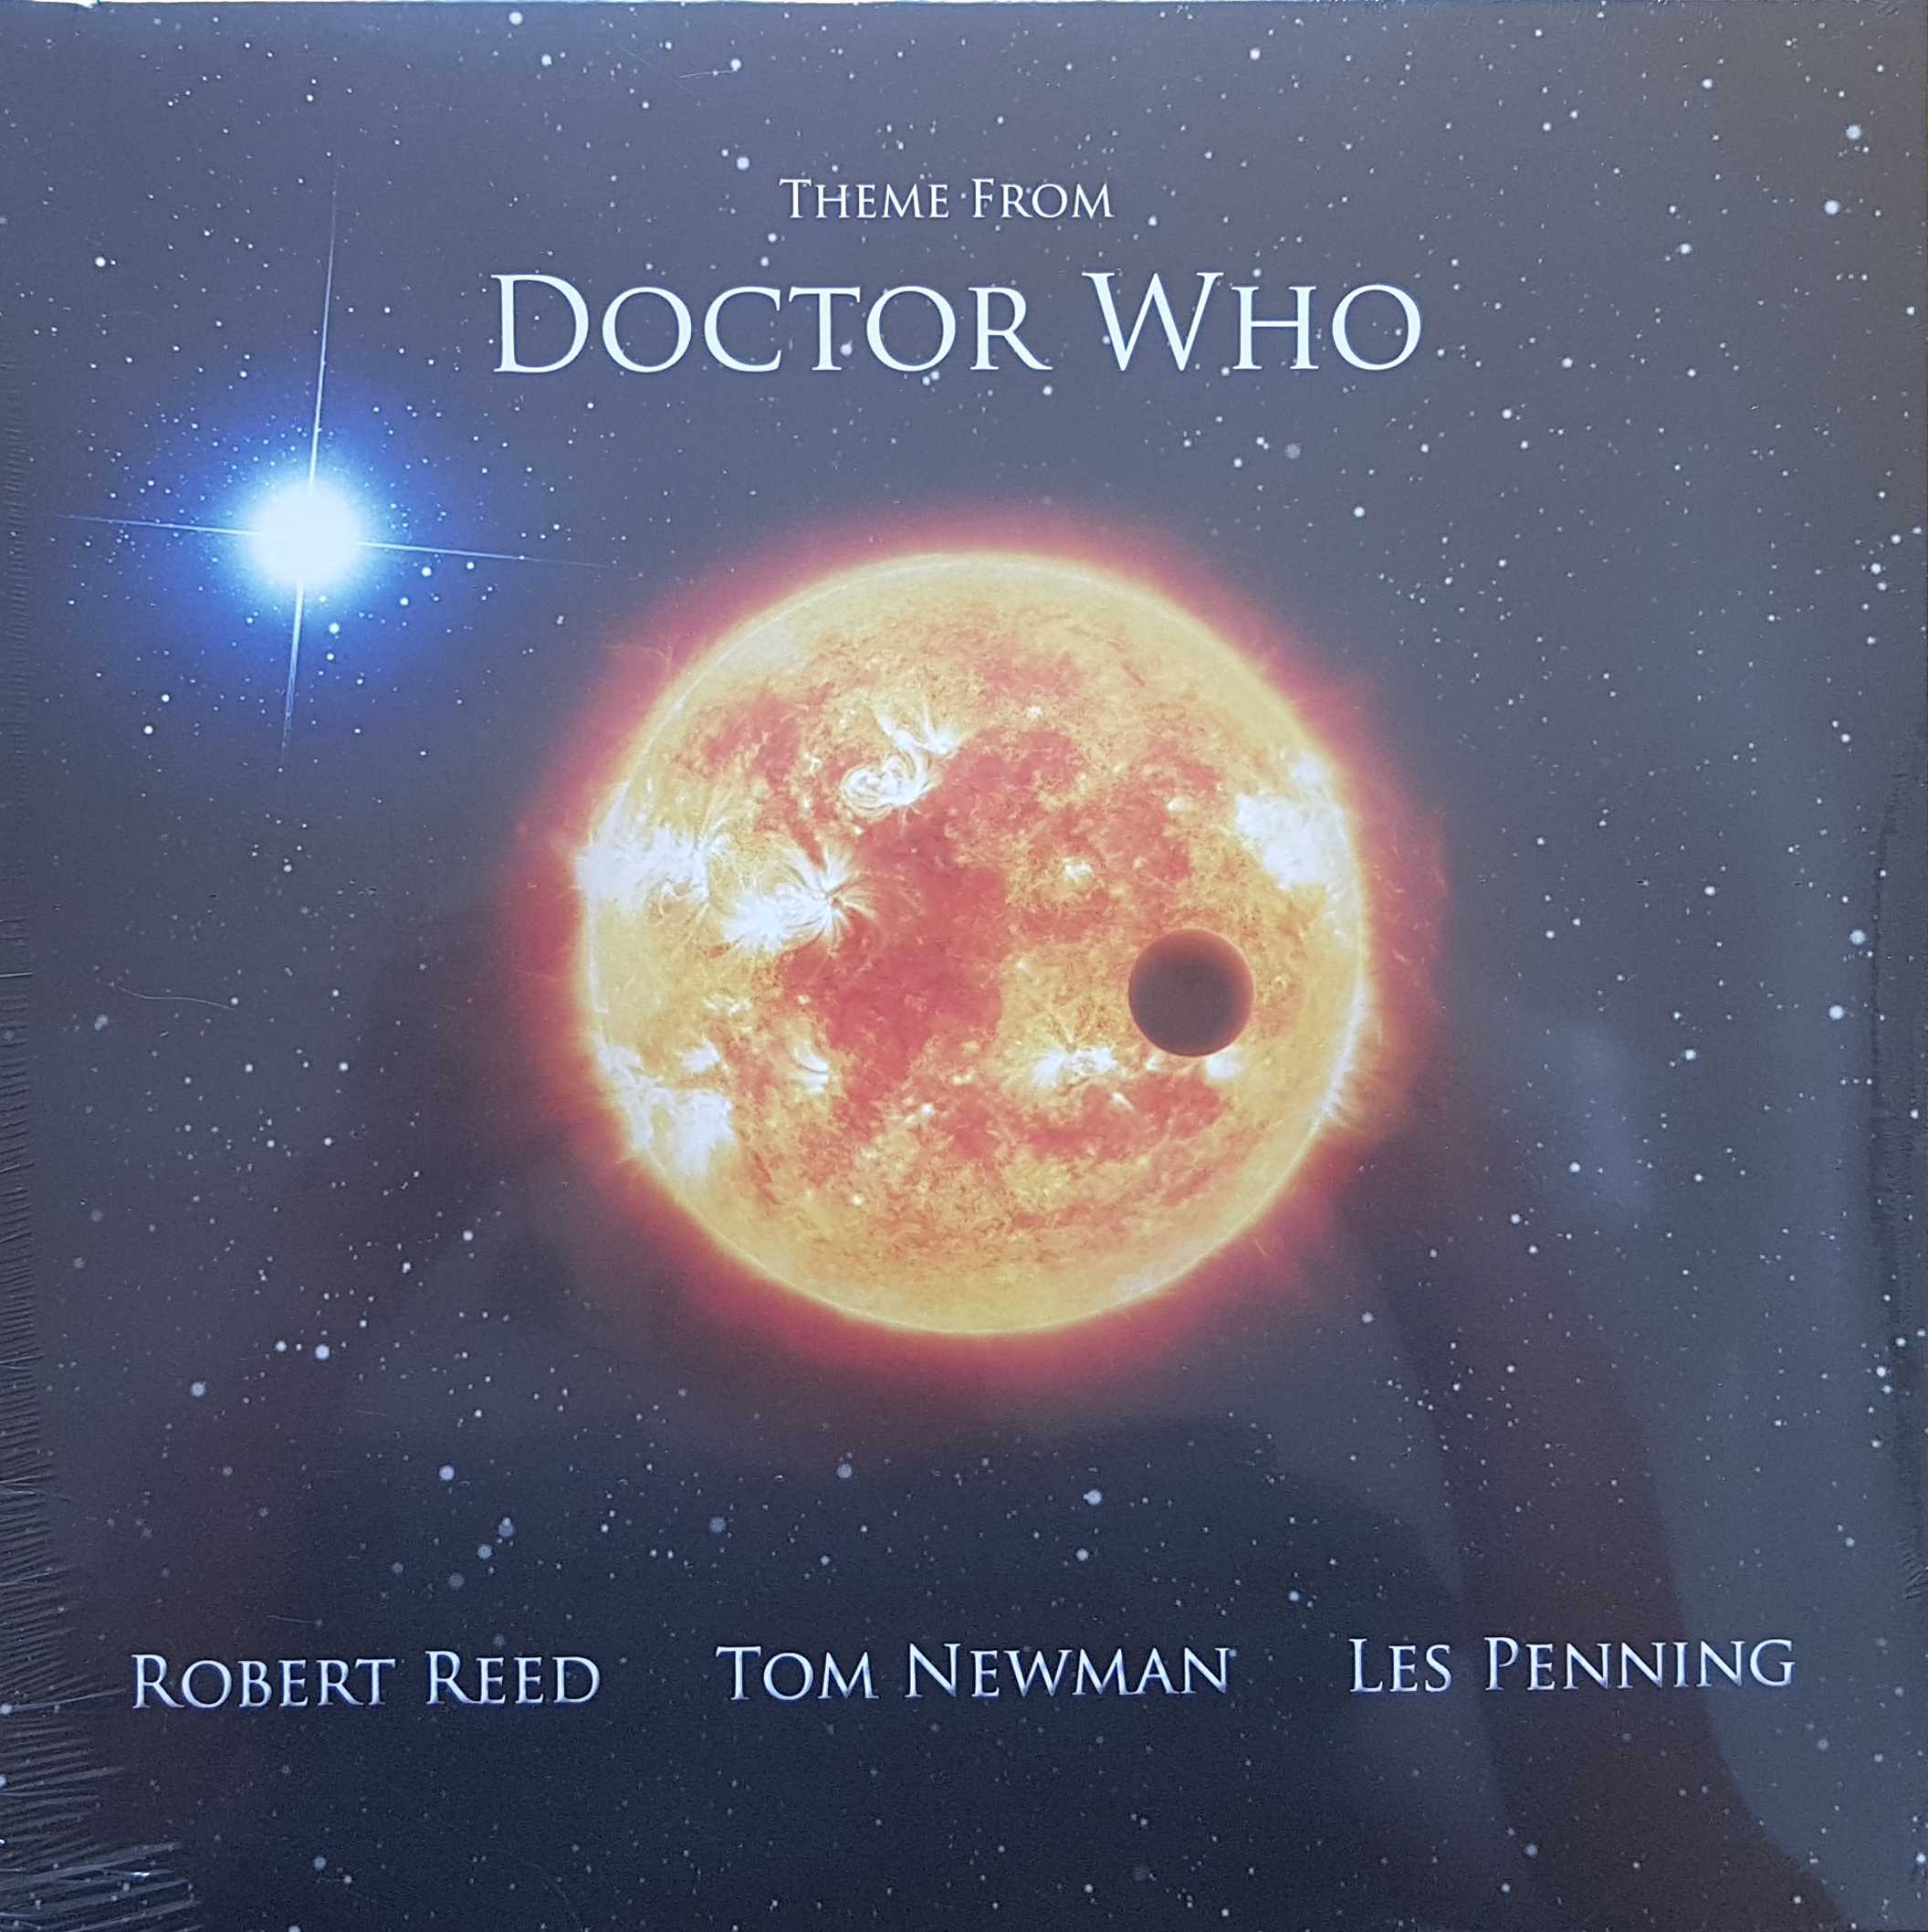 Picture of PLGS 08 Theme from Doctor Who by artist Robert Reed / Tom Newman / Les Penning / Ron Grainer from the BBC records and Tapes library